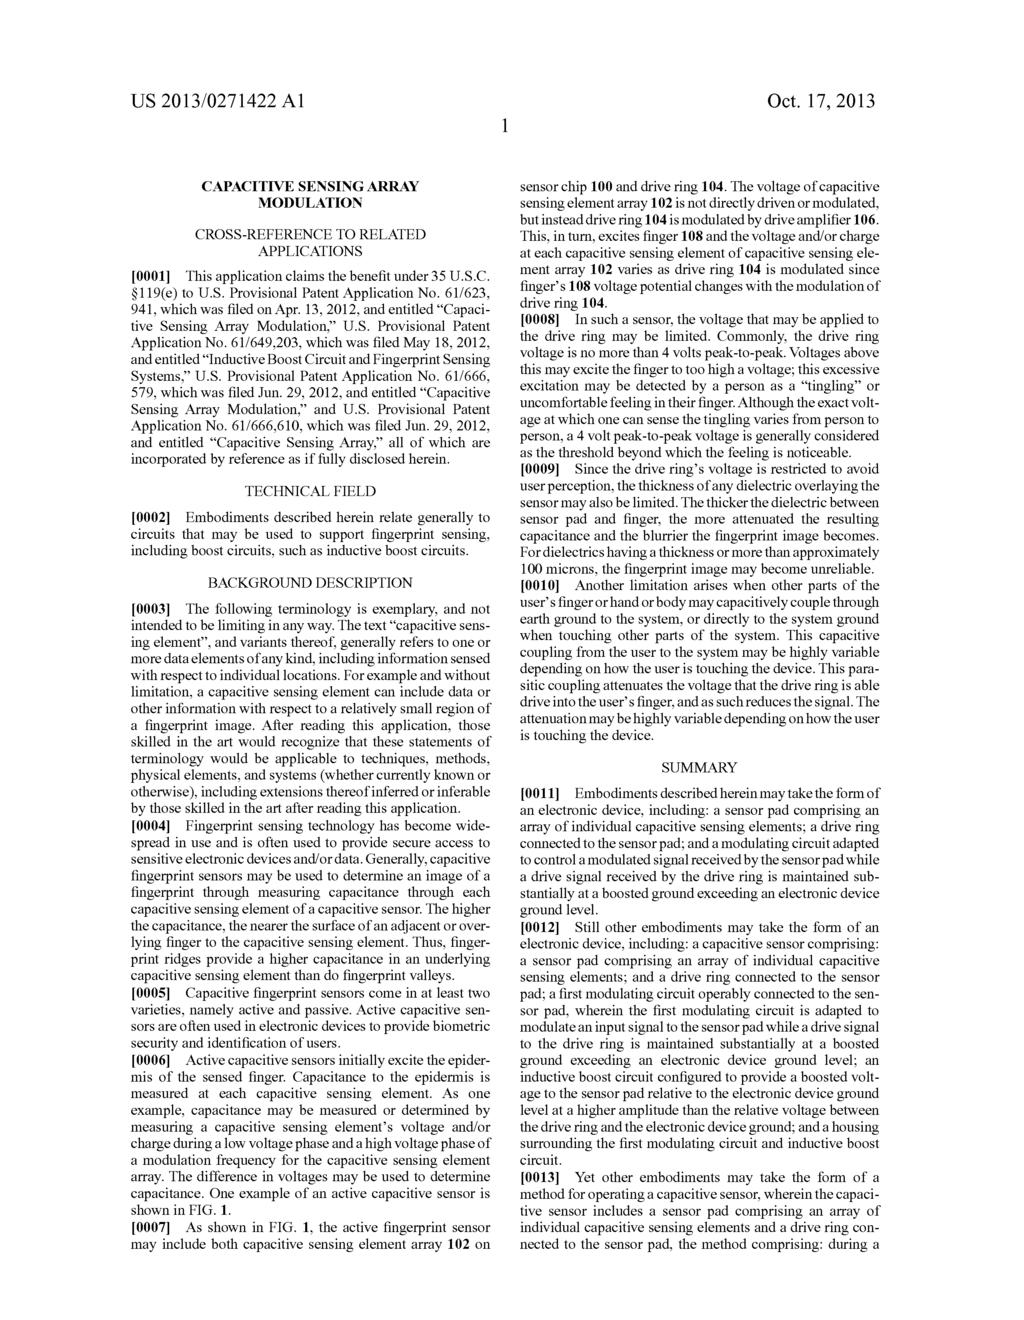 US 2013/0271422 A1 Oct. 17, 2013 CAPACTIVE SENSING ARRAY MODULATION CROSS-REFERENCE TO RELATED APPLICATIONS 0001. This application claims the benefit under 35 U.S.C. S119(e) to U.S. Provisional Patent Application No.